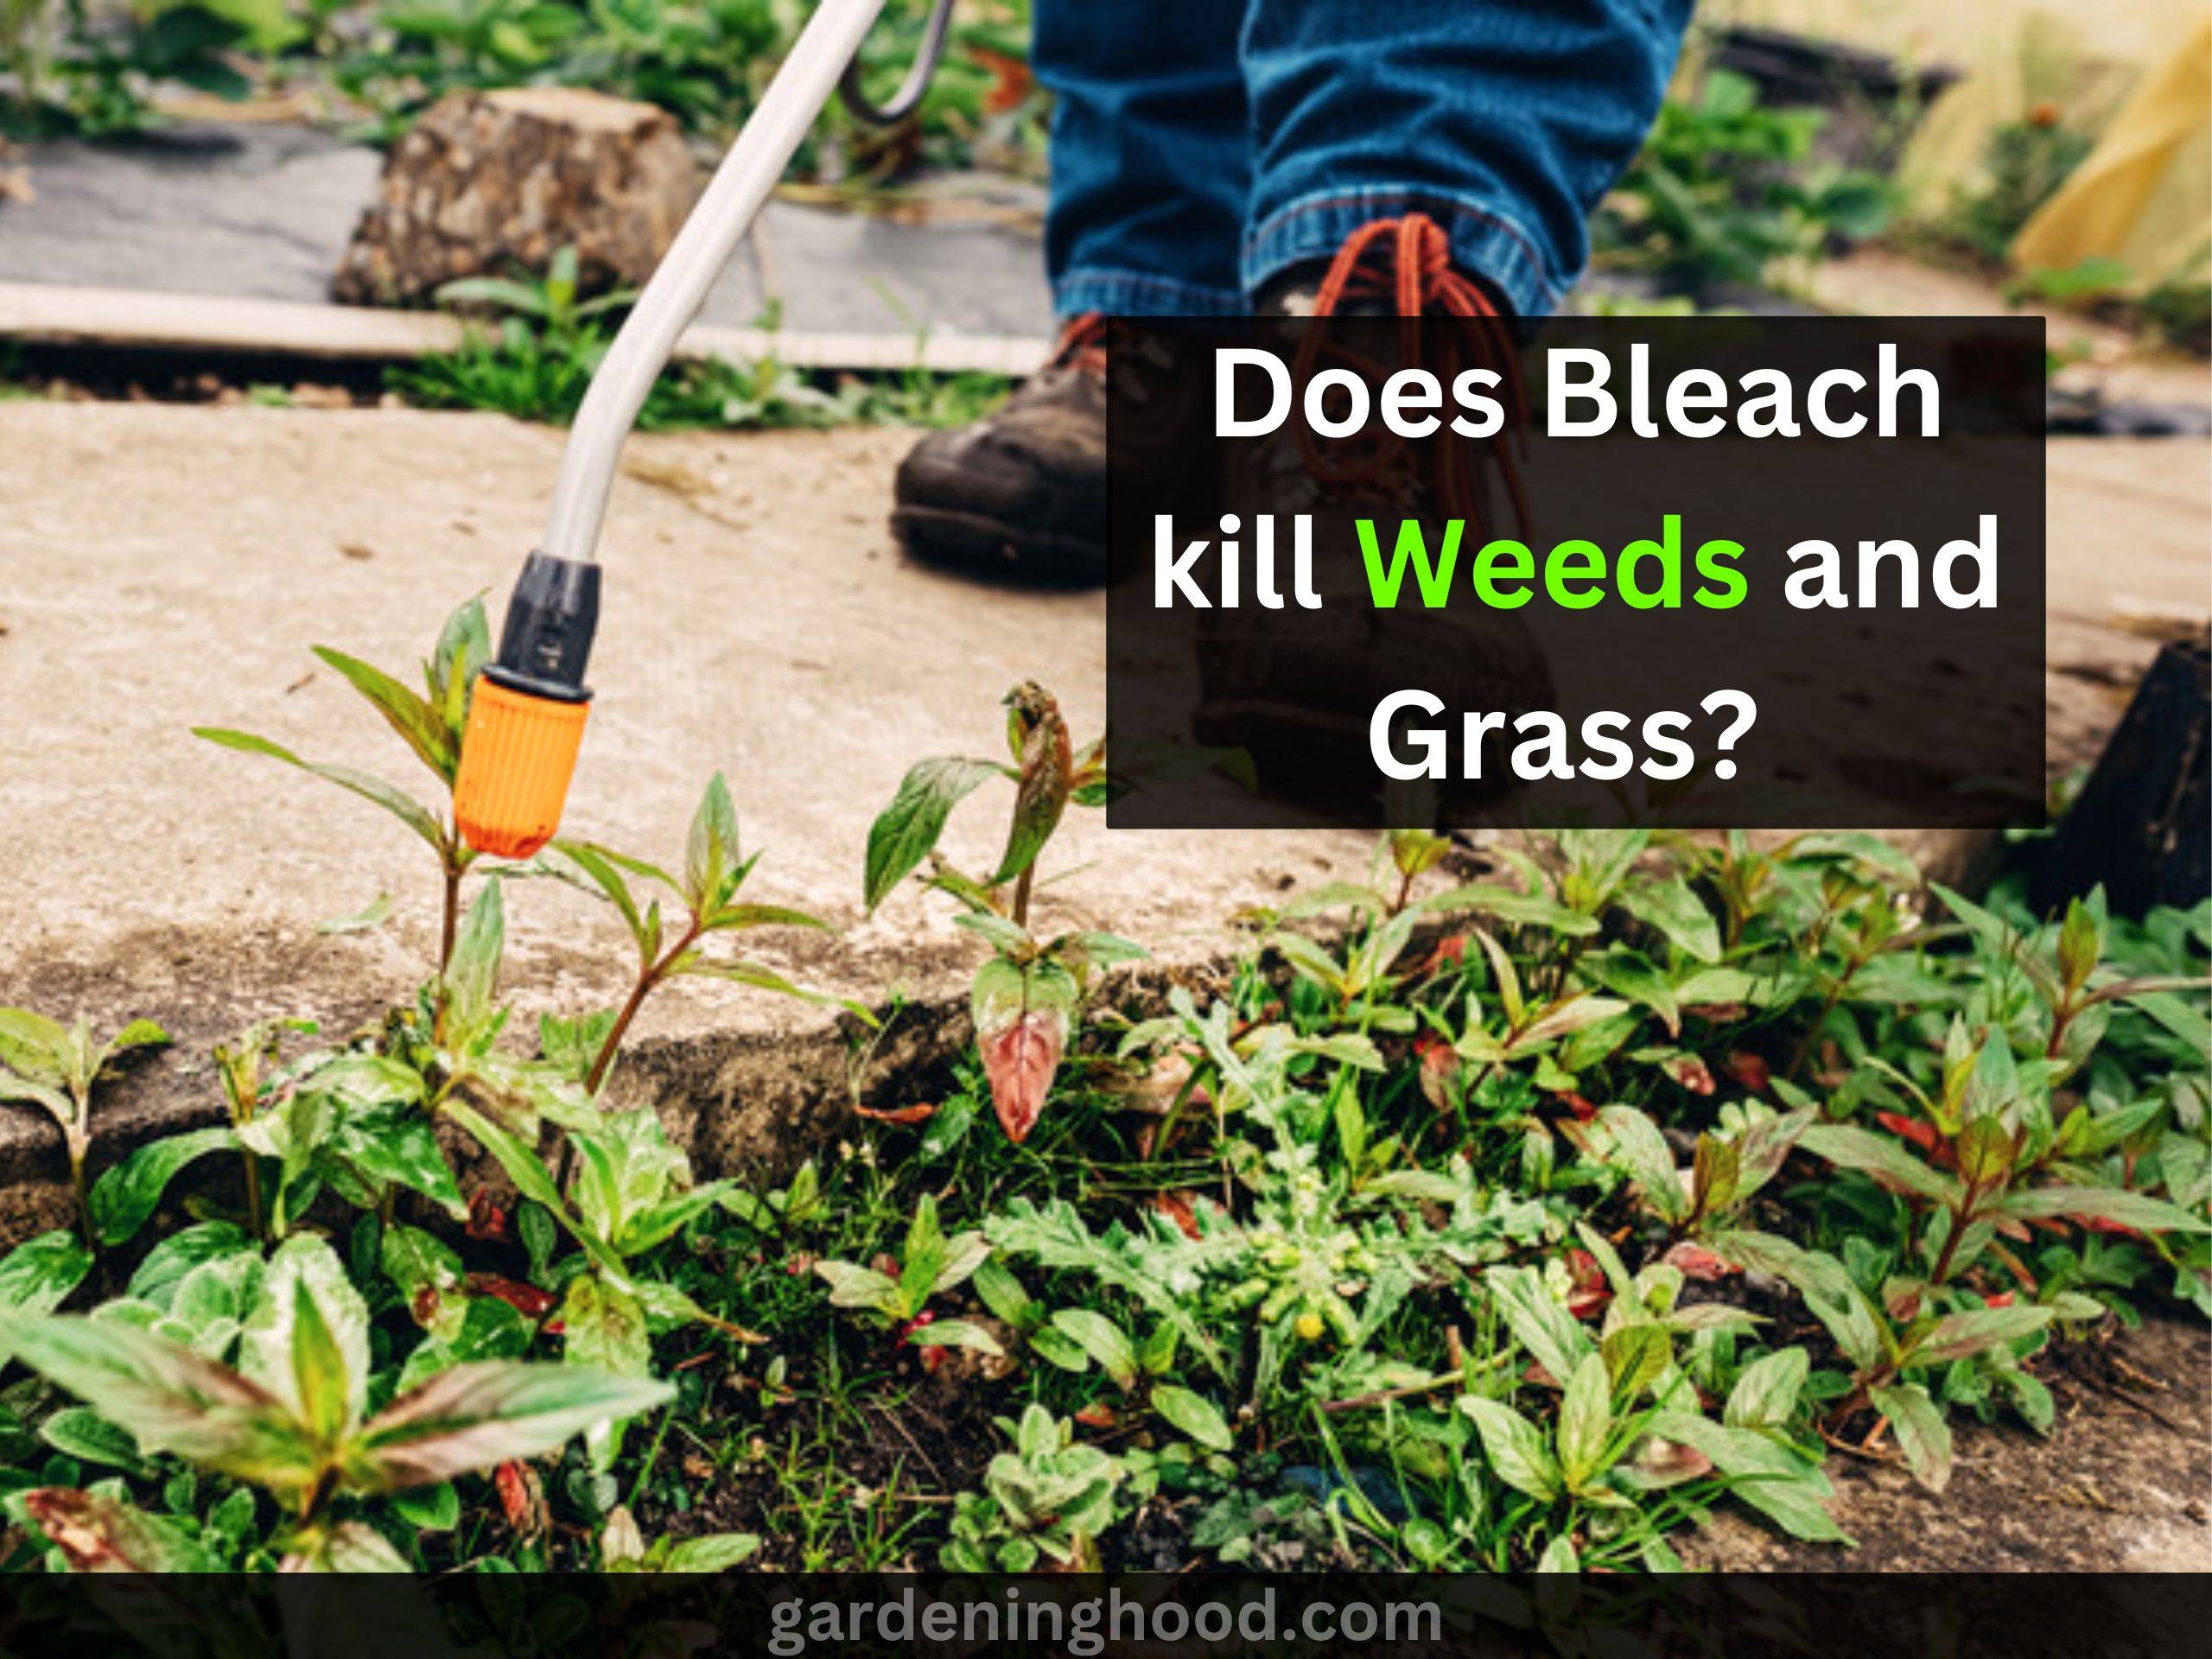 Does Bleach kill Weeds and Grass? - Here's how to use it!